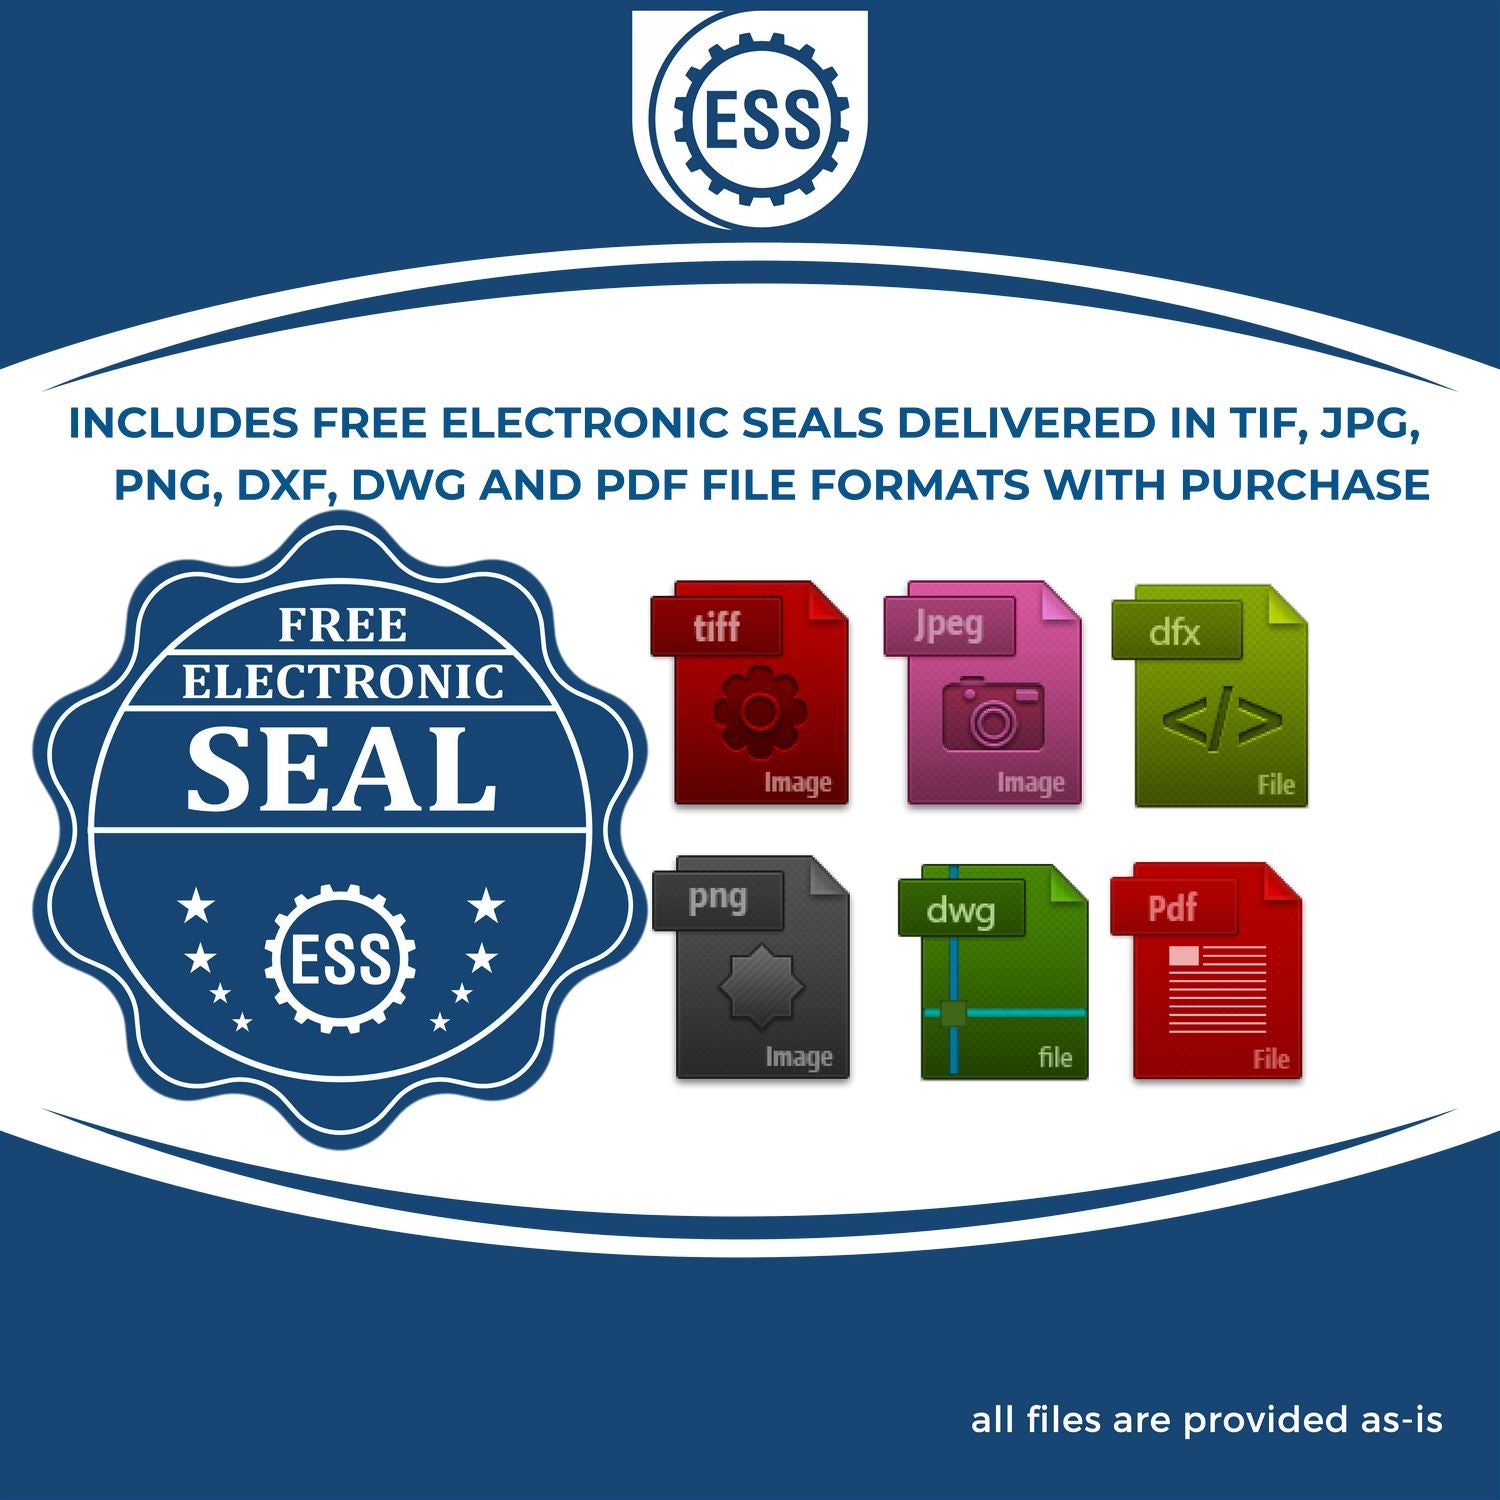 An infographic for the free electronic seal for the Heavy Duty Cast Iron Arkansas Architect Embosser illustrating the different file type icons such as DXF, DWG, TIF, JPG and PNG.